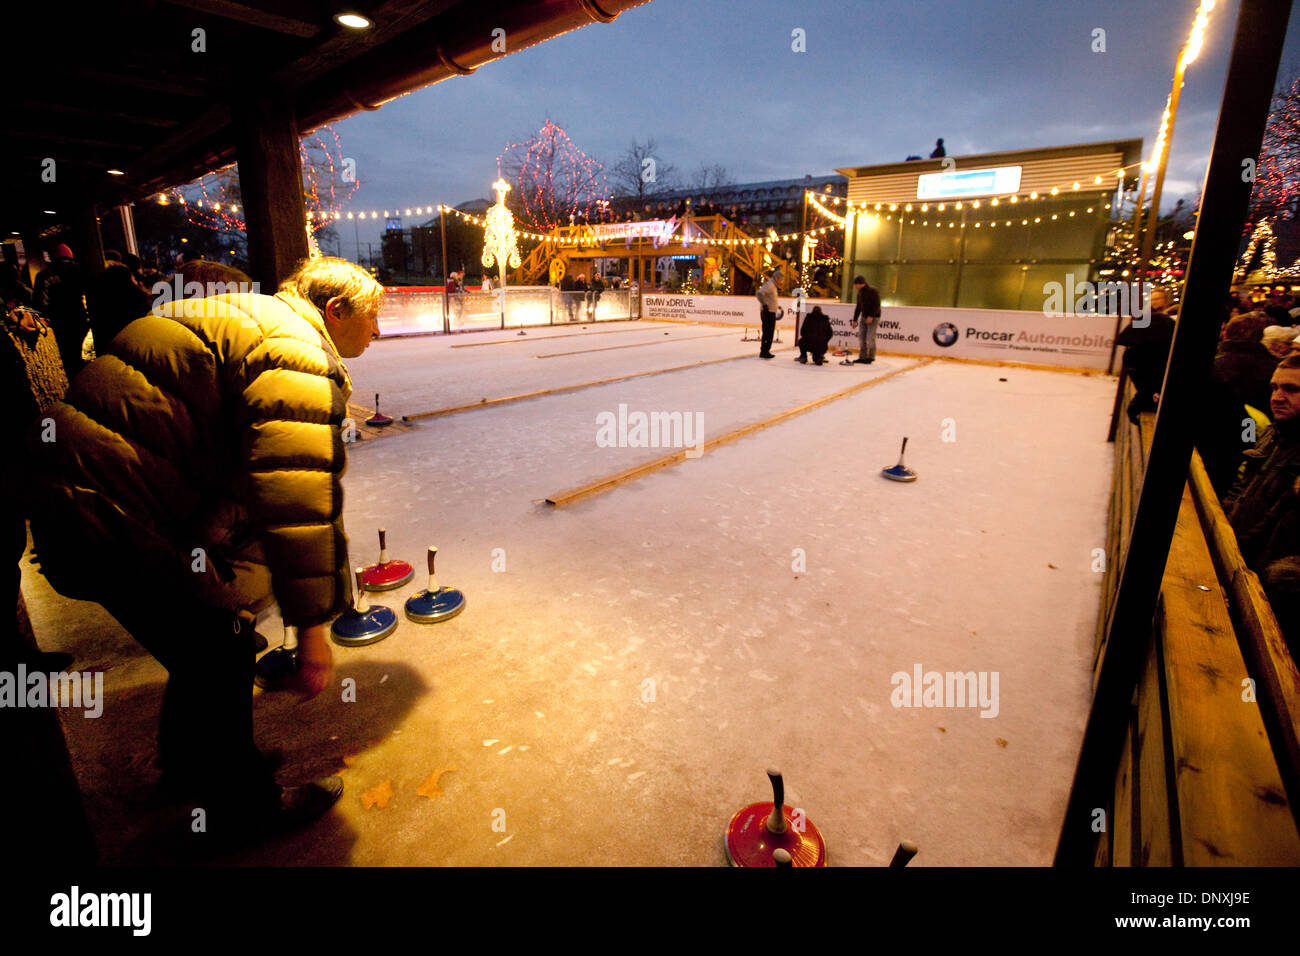 German people playing Ice Stock Sport, a game similar to curling, at Cologne Christmas market, Cologne ( Koln ), Germany, Europe Stock Photo